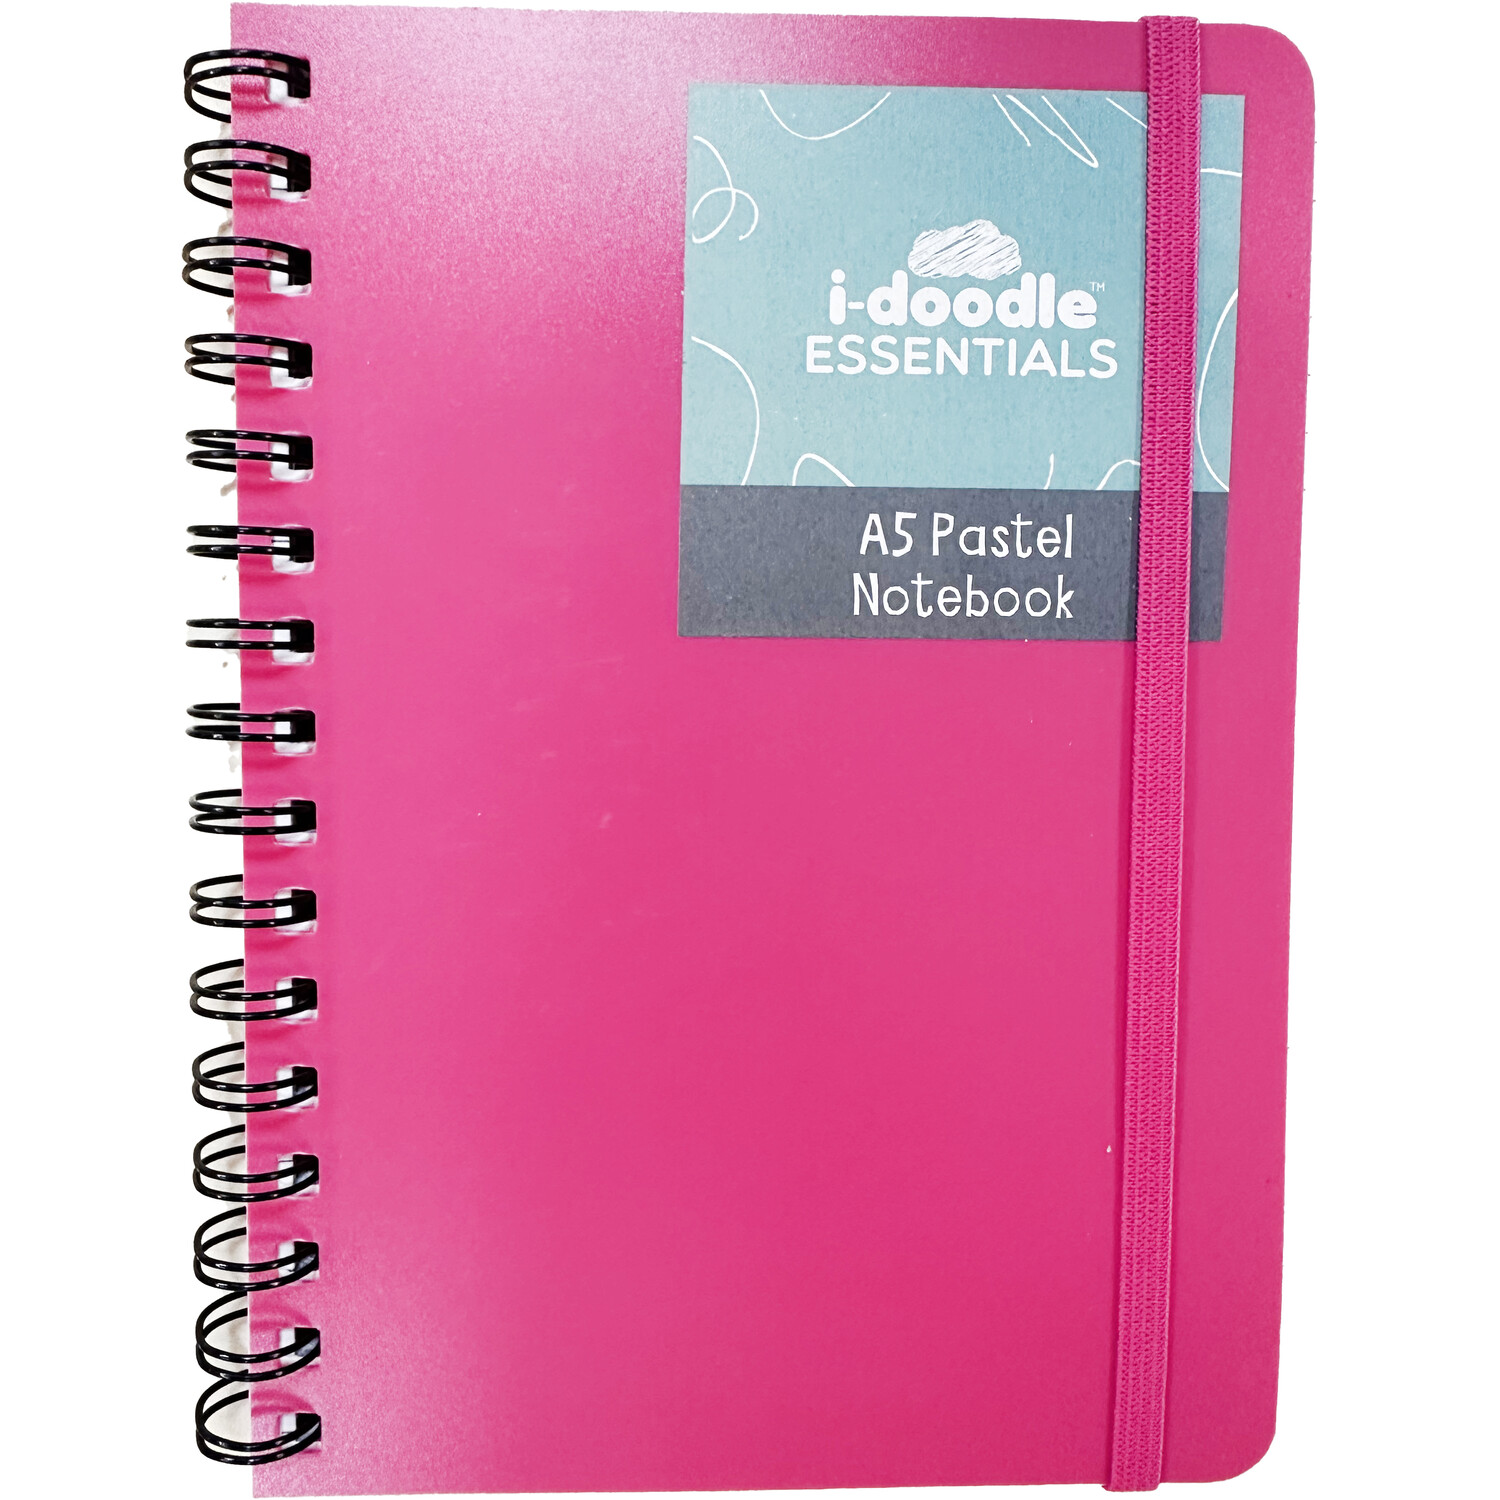 A5 Pastel Notebook Cover Image 3